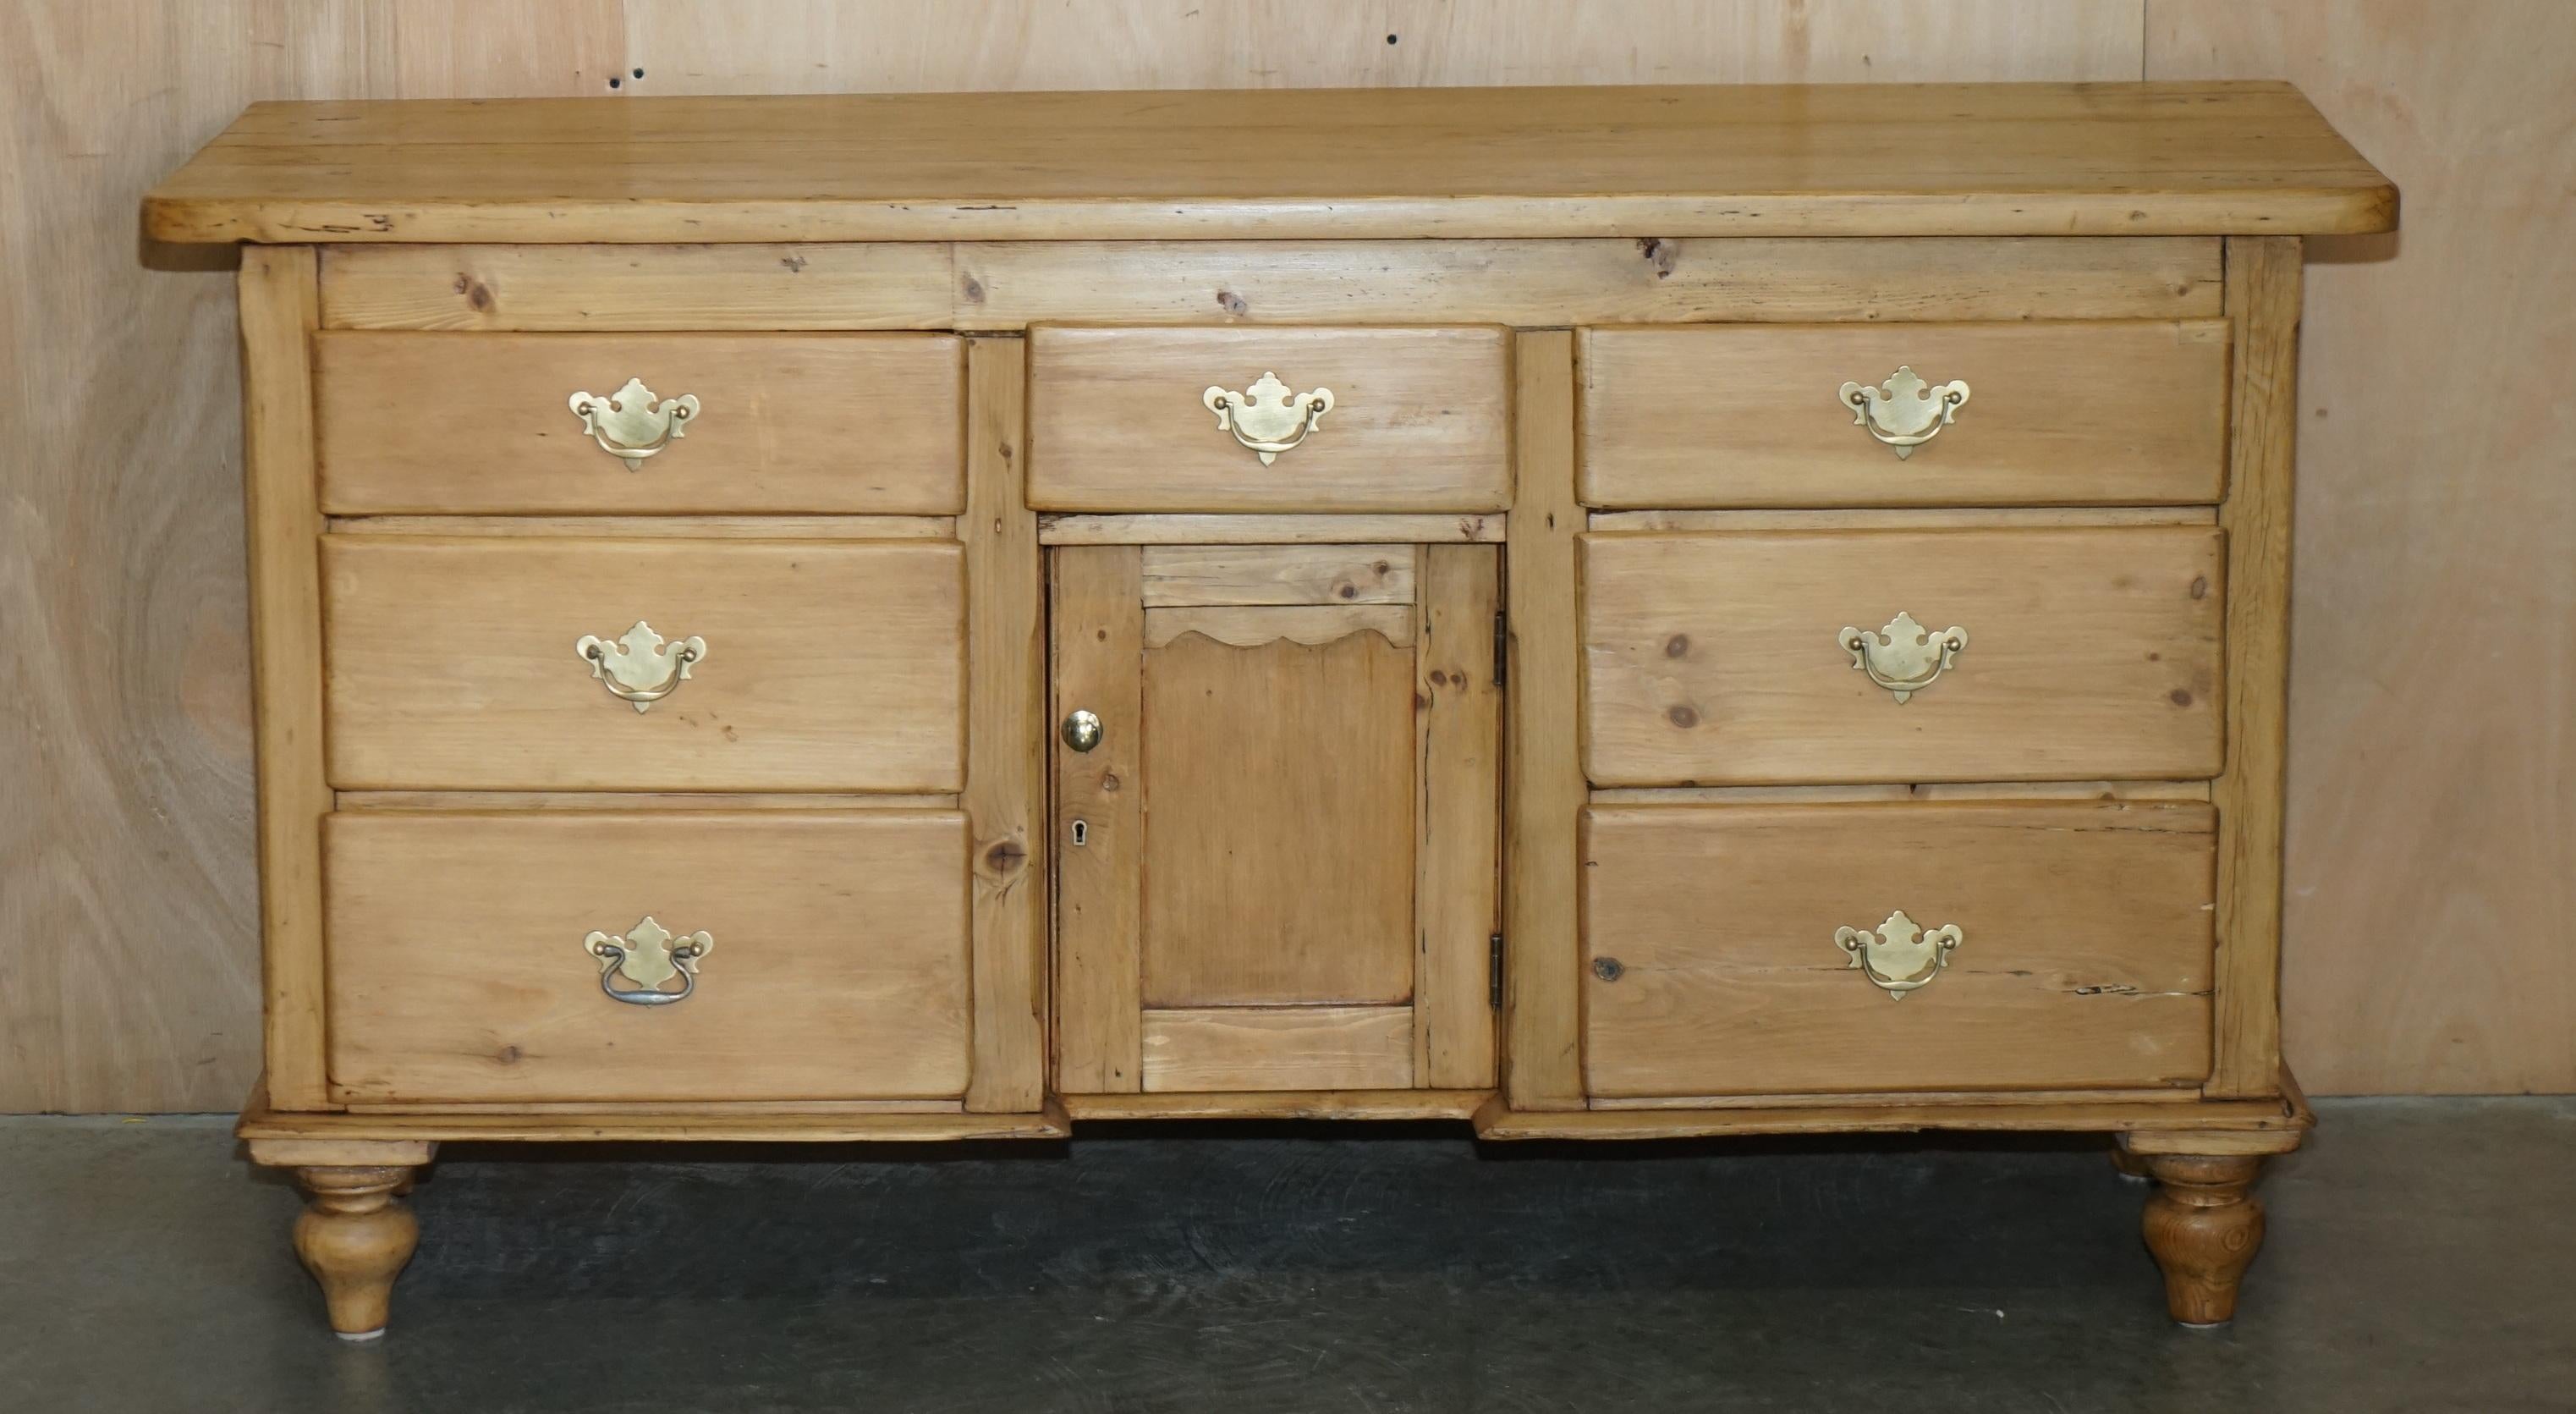 Royal House Antiques

Royal House Antiques is delighted to offer for sale this absolutely exquisite circa 1860 fully restored, stripped pine housekeepers sideboard 

Please note the delivery fee listed is just a guide, it covers within the M25 only